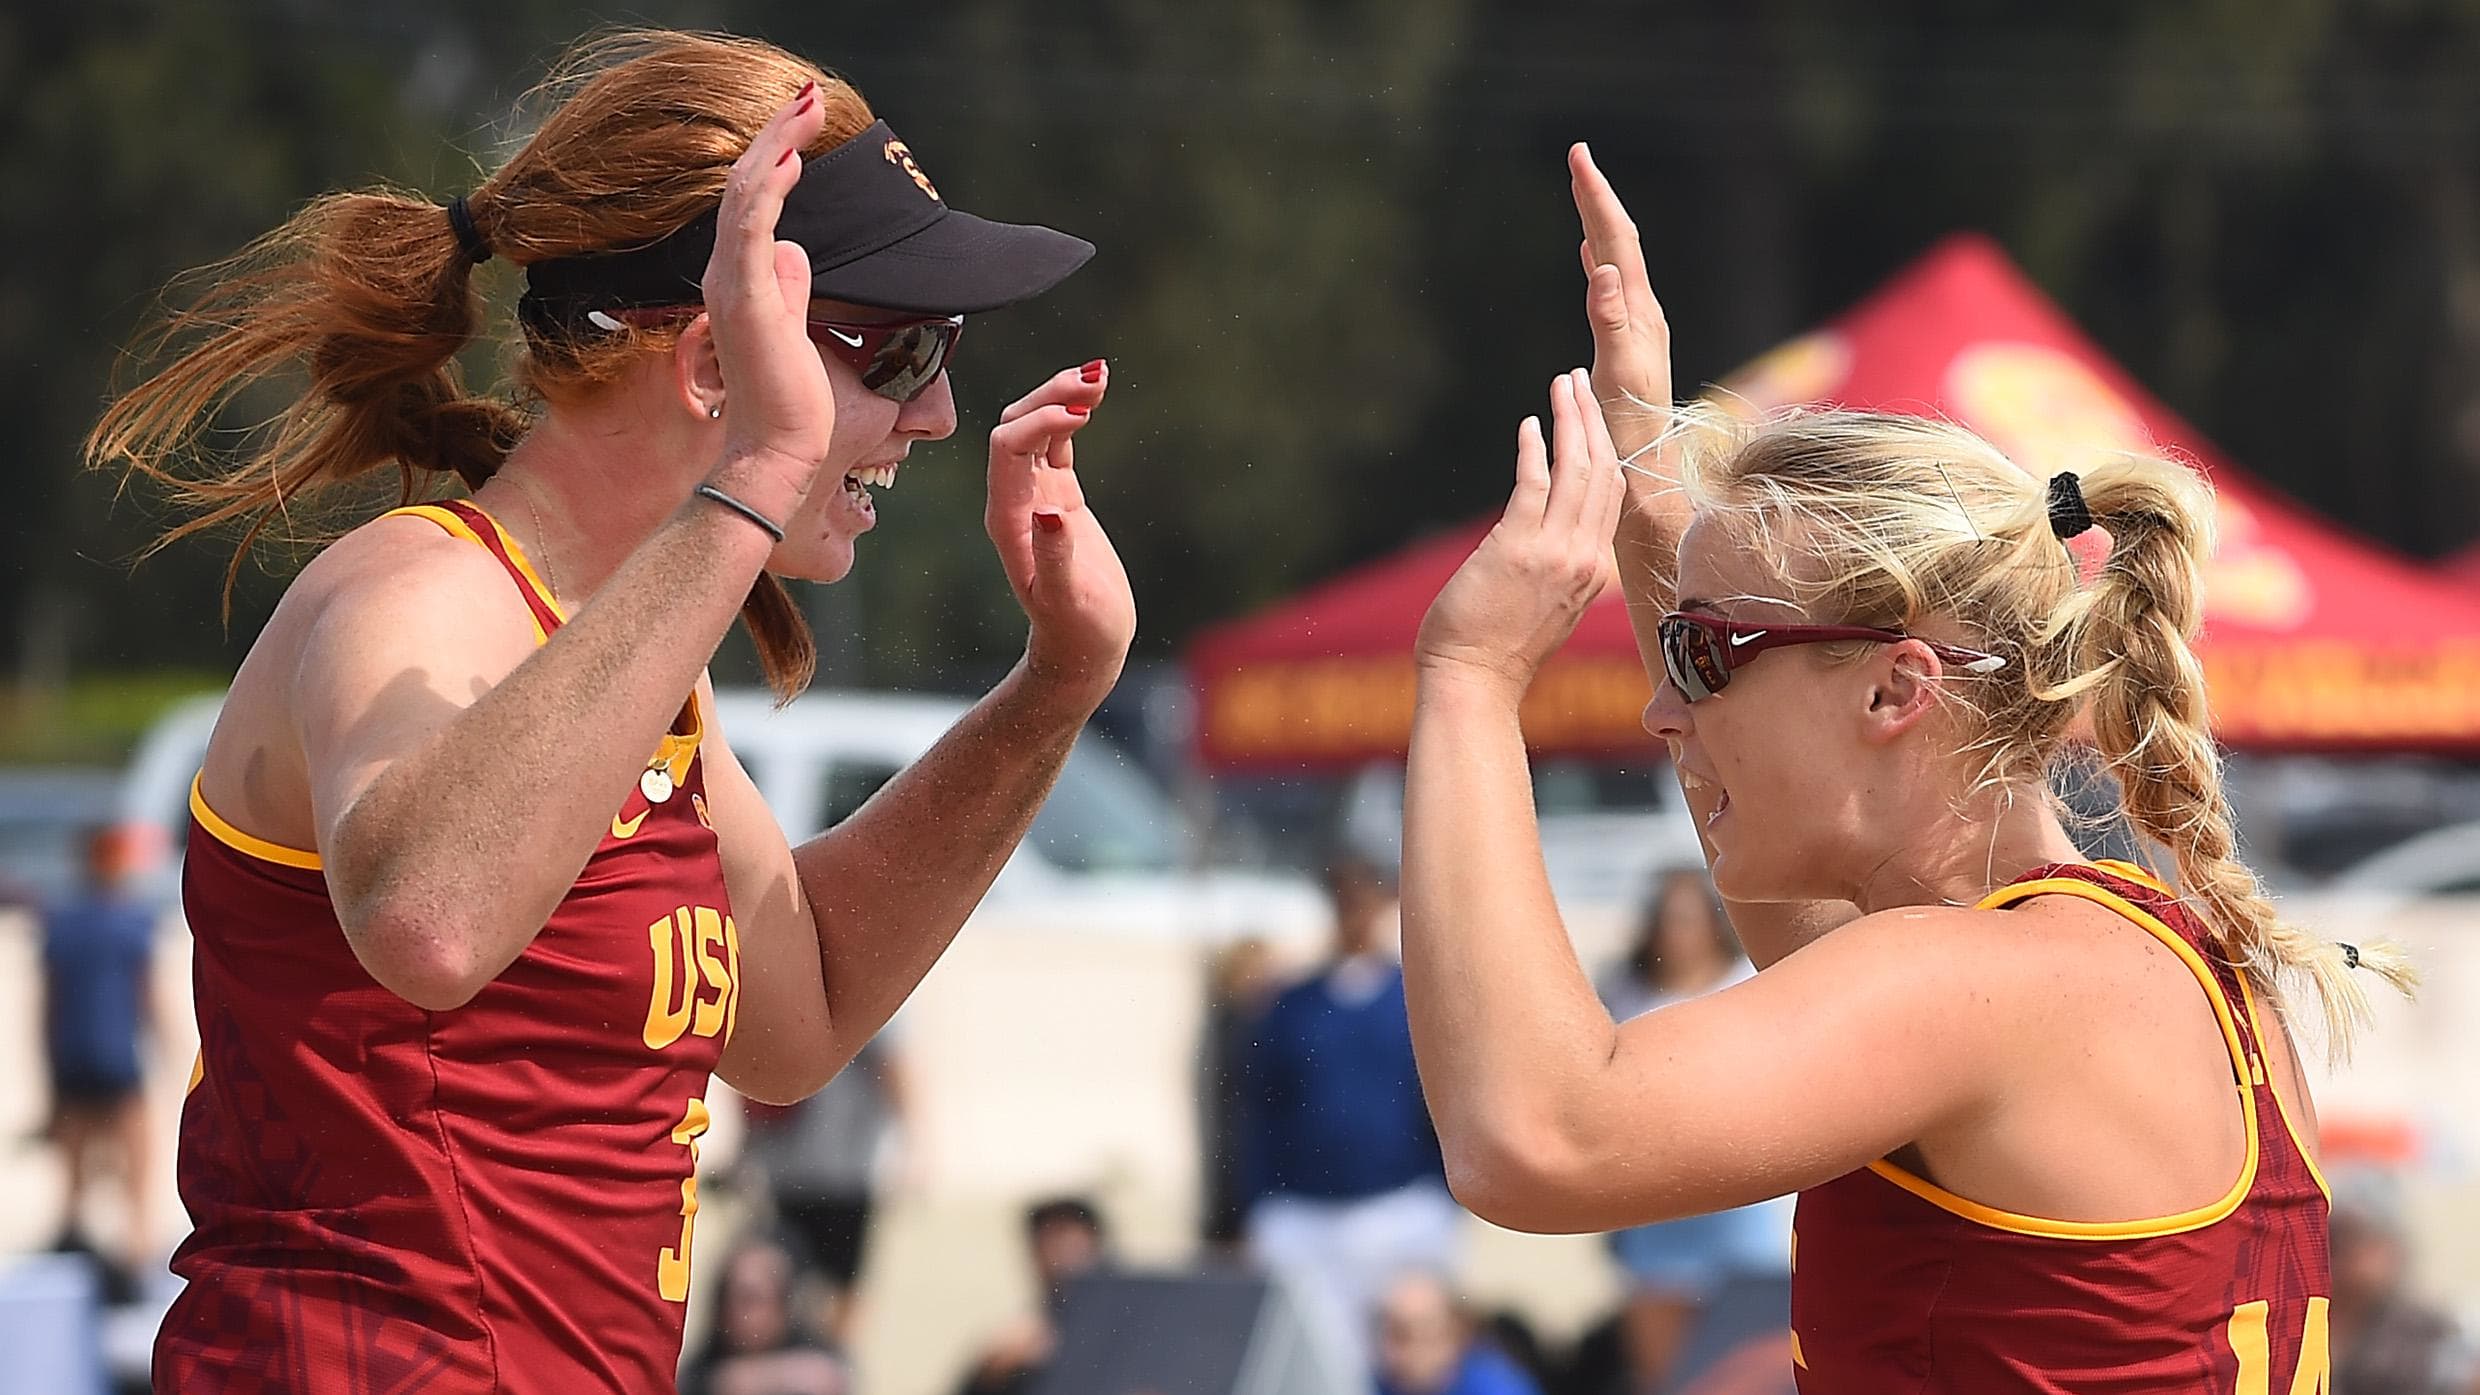 USC Women’s Beach Volleyball Wins 4th Consecutive Championship, Besting Loathed Rival